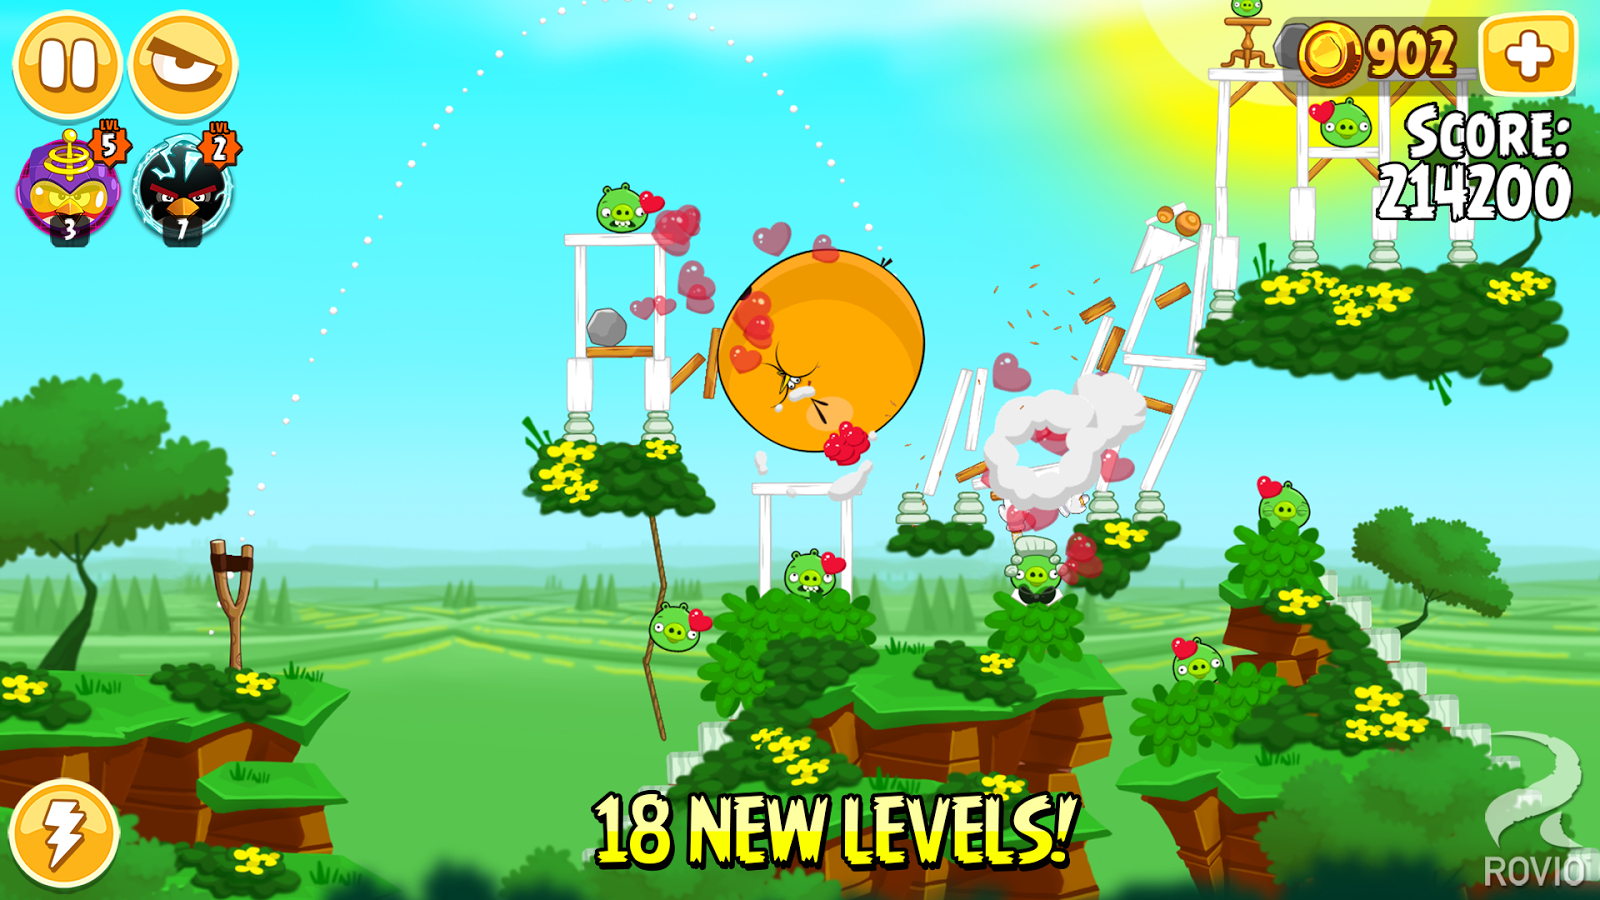 Download Angry Birds Seasons App For Free Install Latest ...